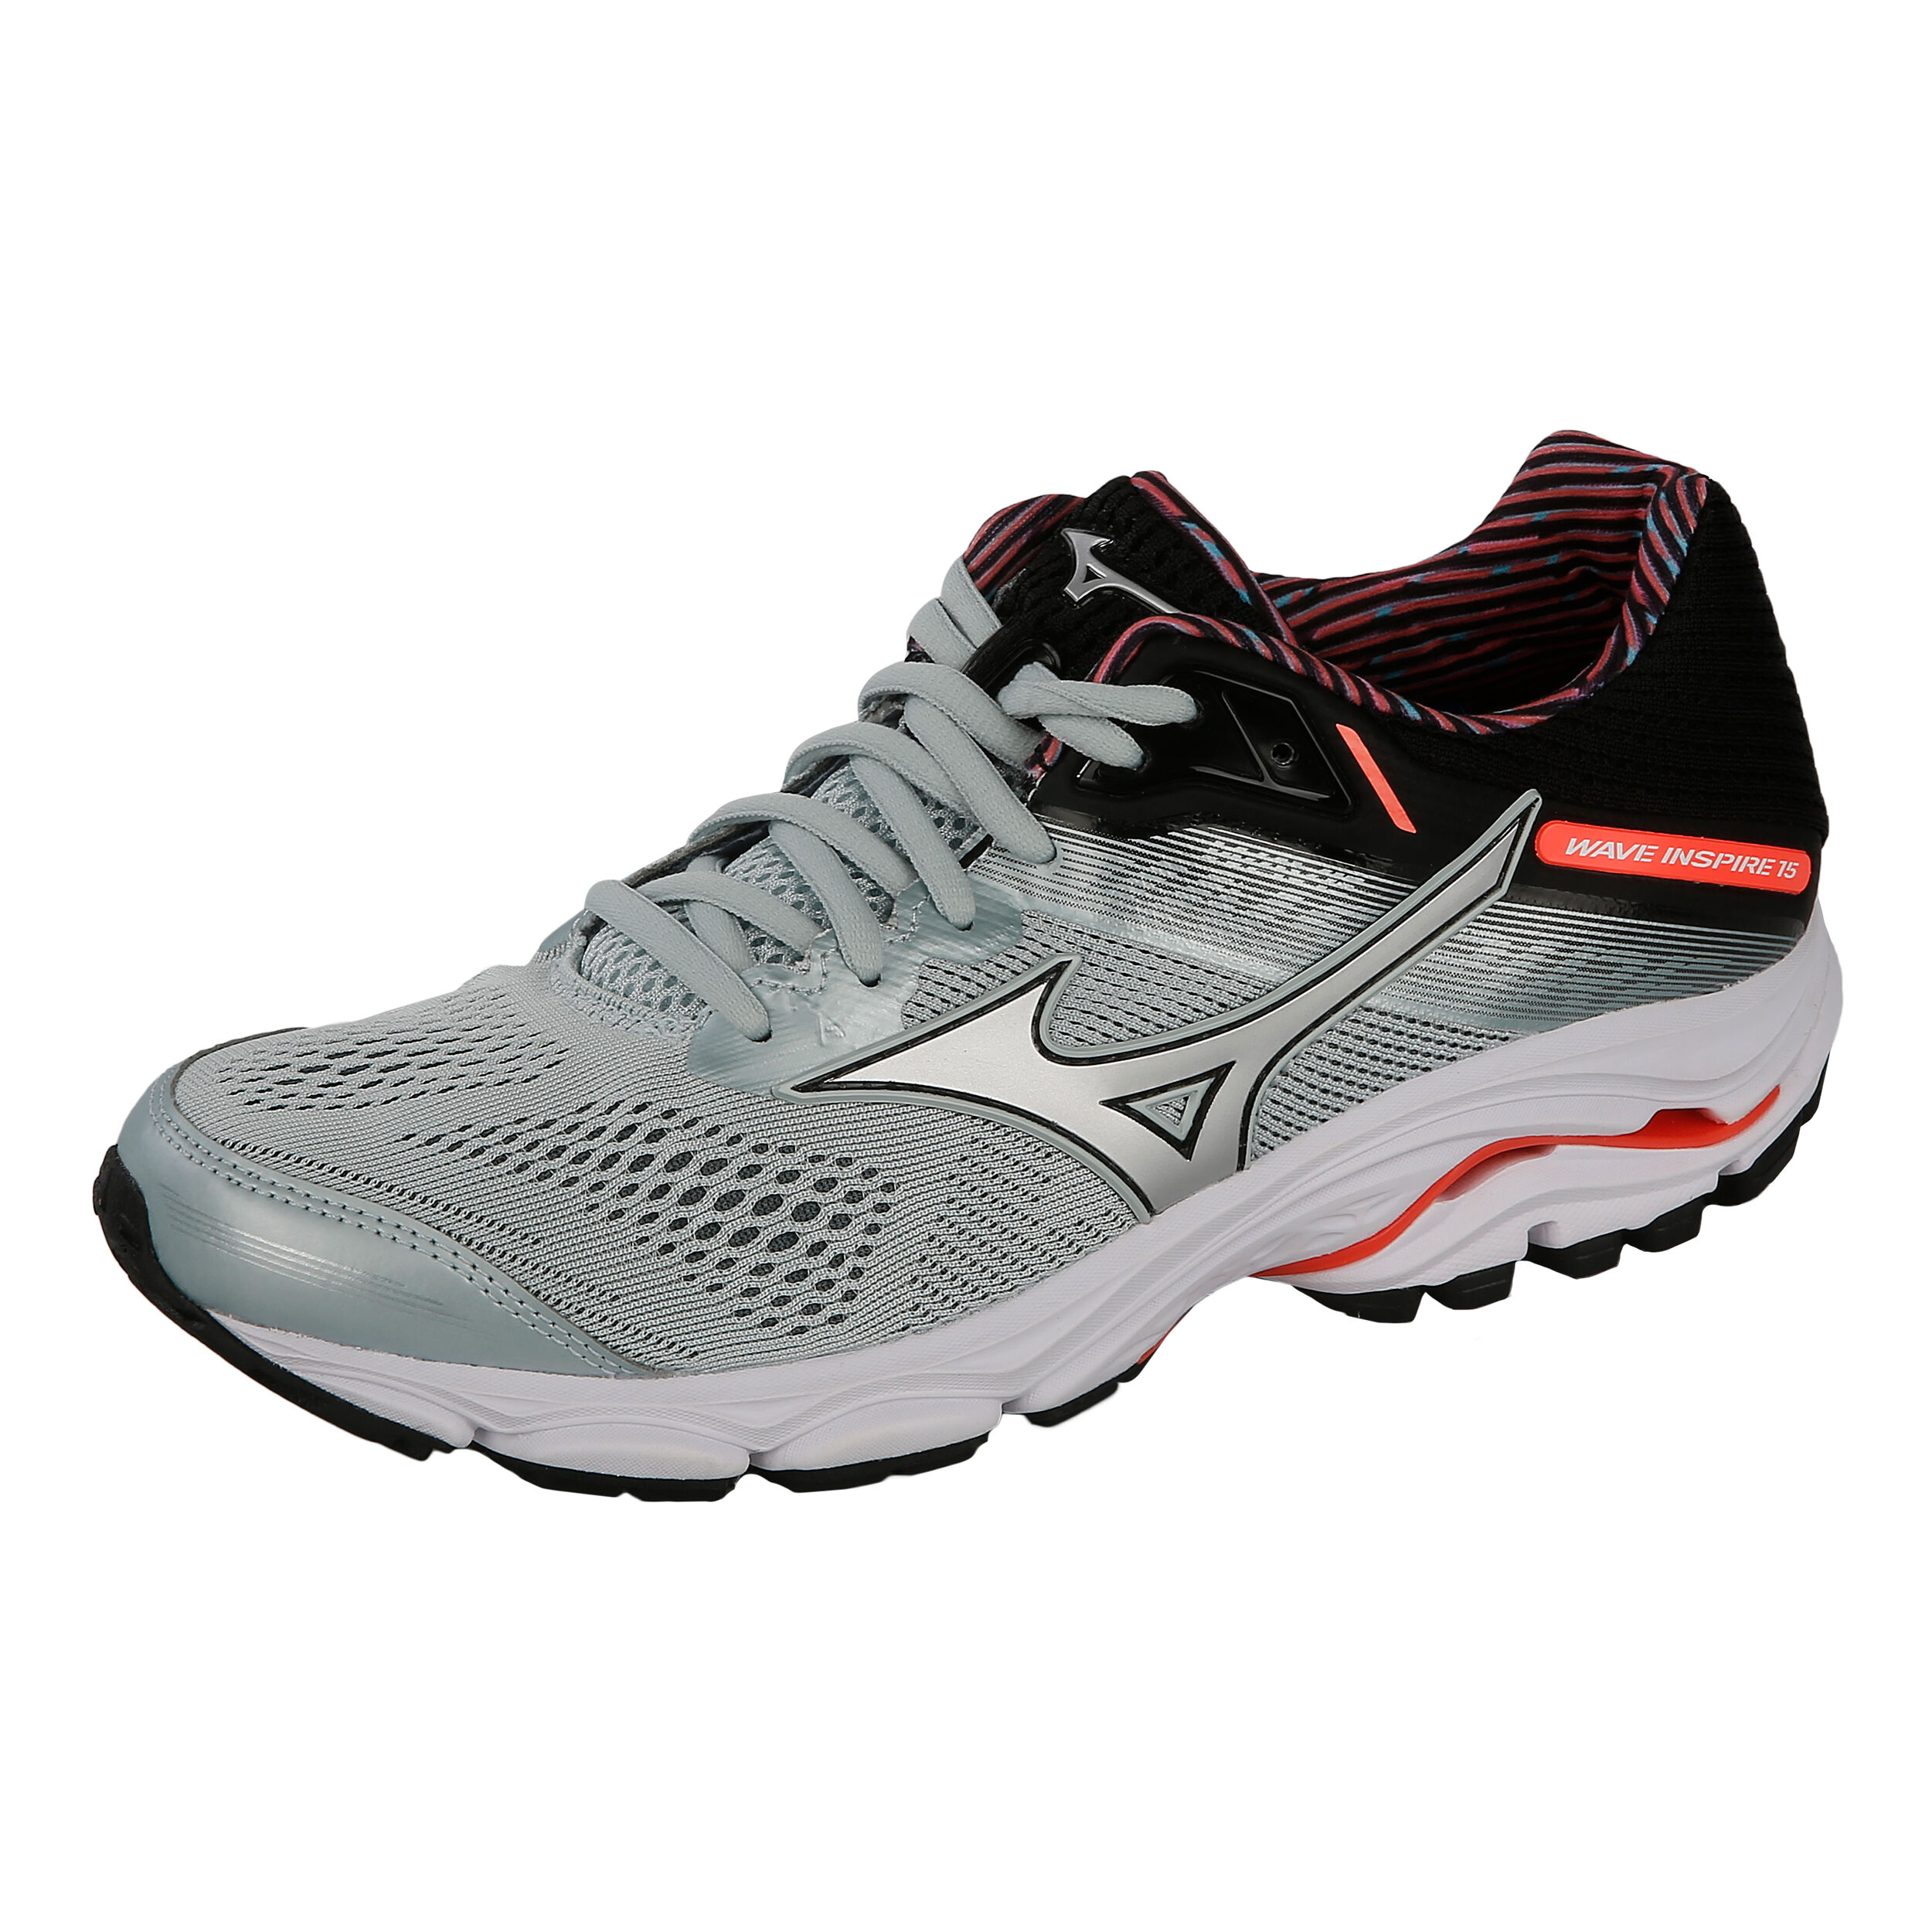 wave inspire 15 womens